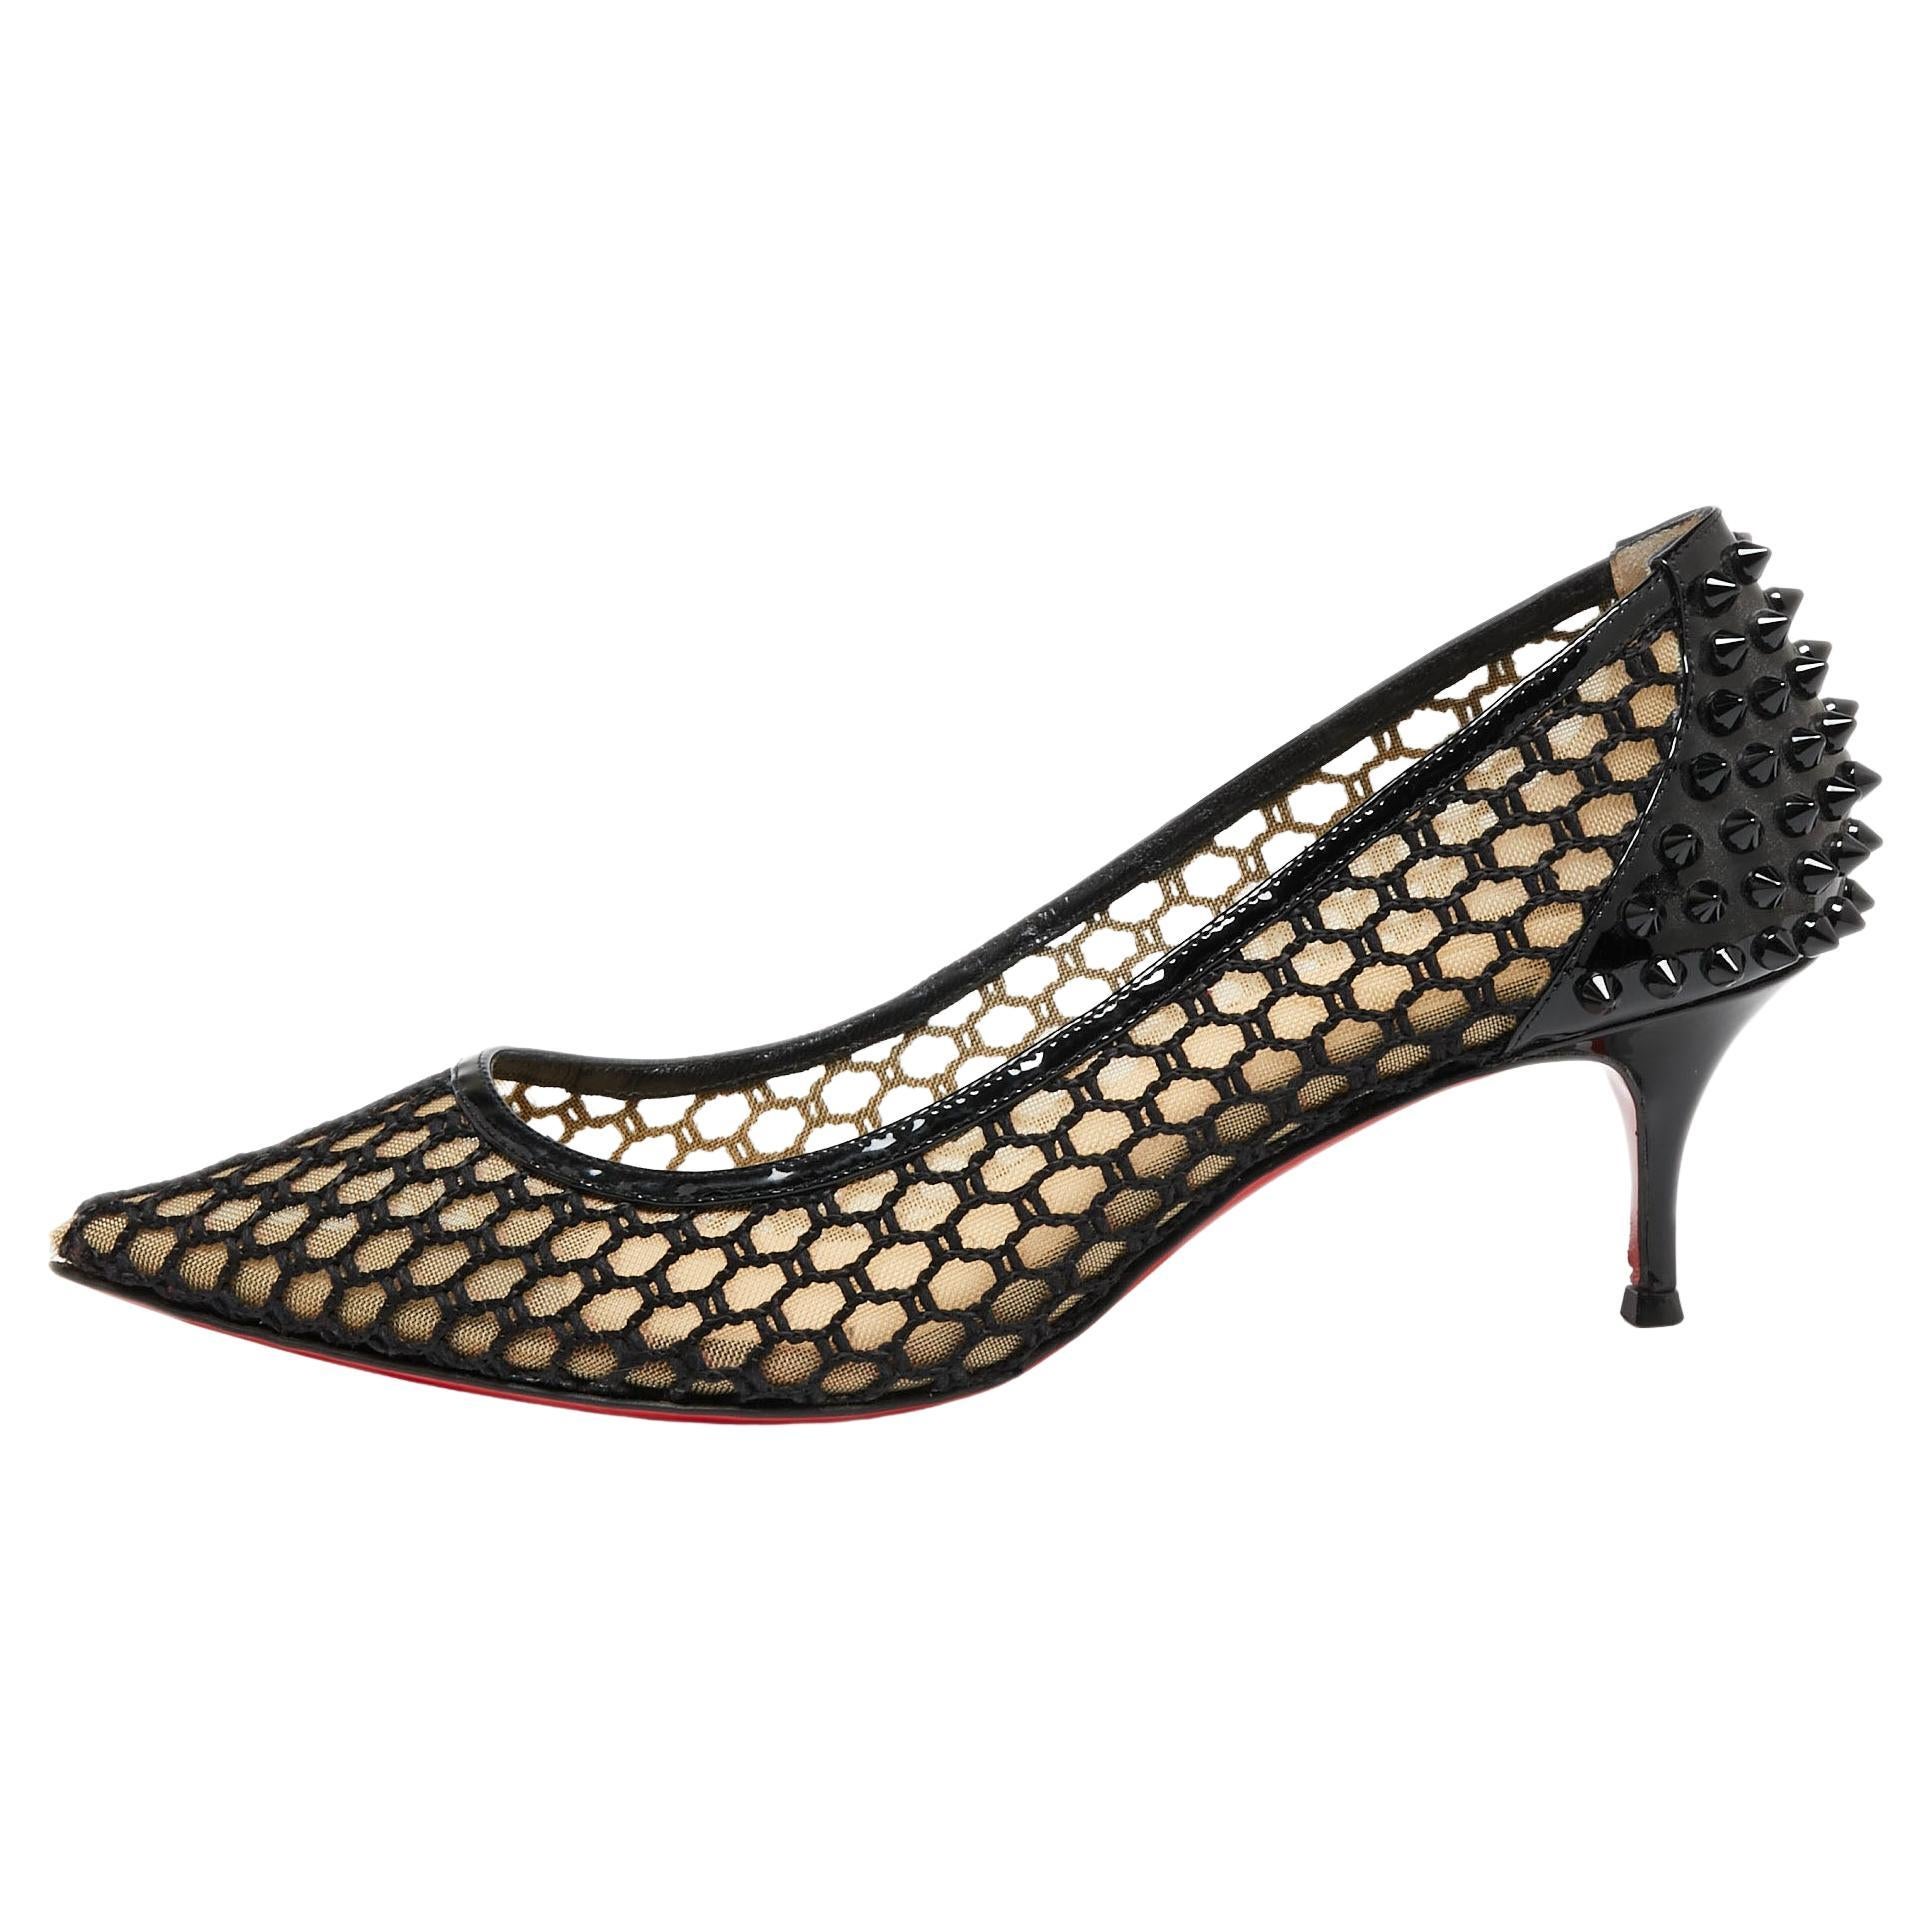 Christian Louboutin Spike Accents Patent Leather Slingback Pumps